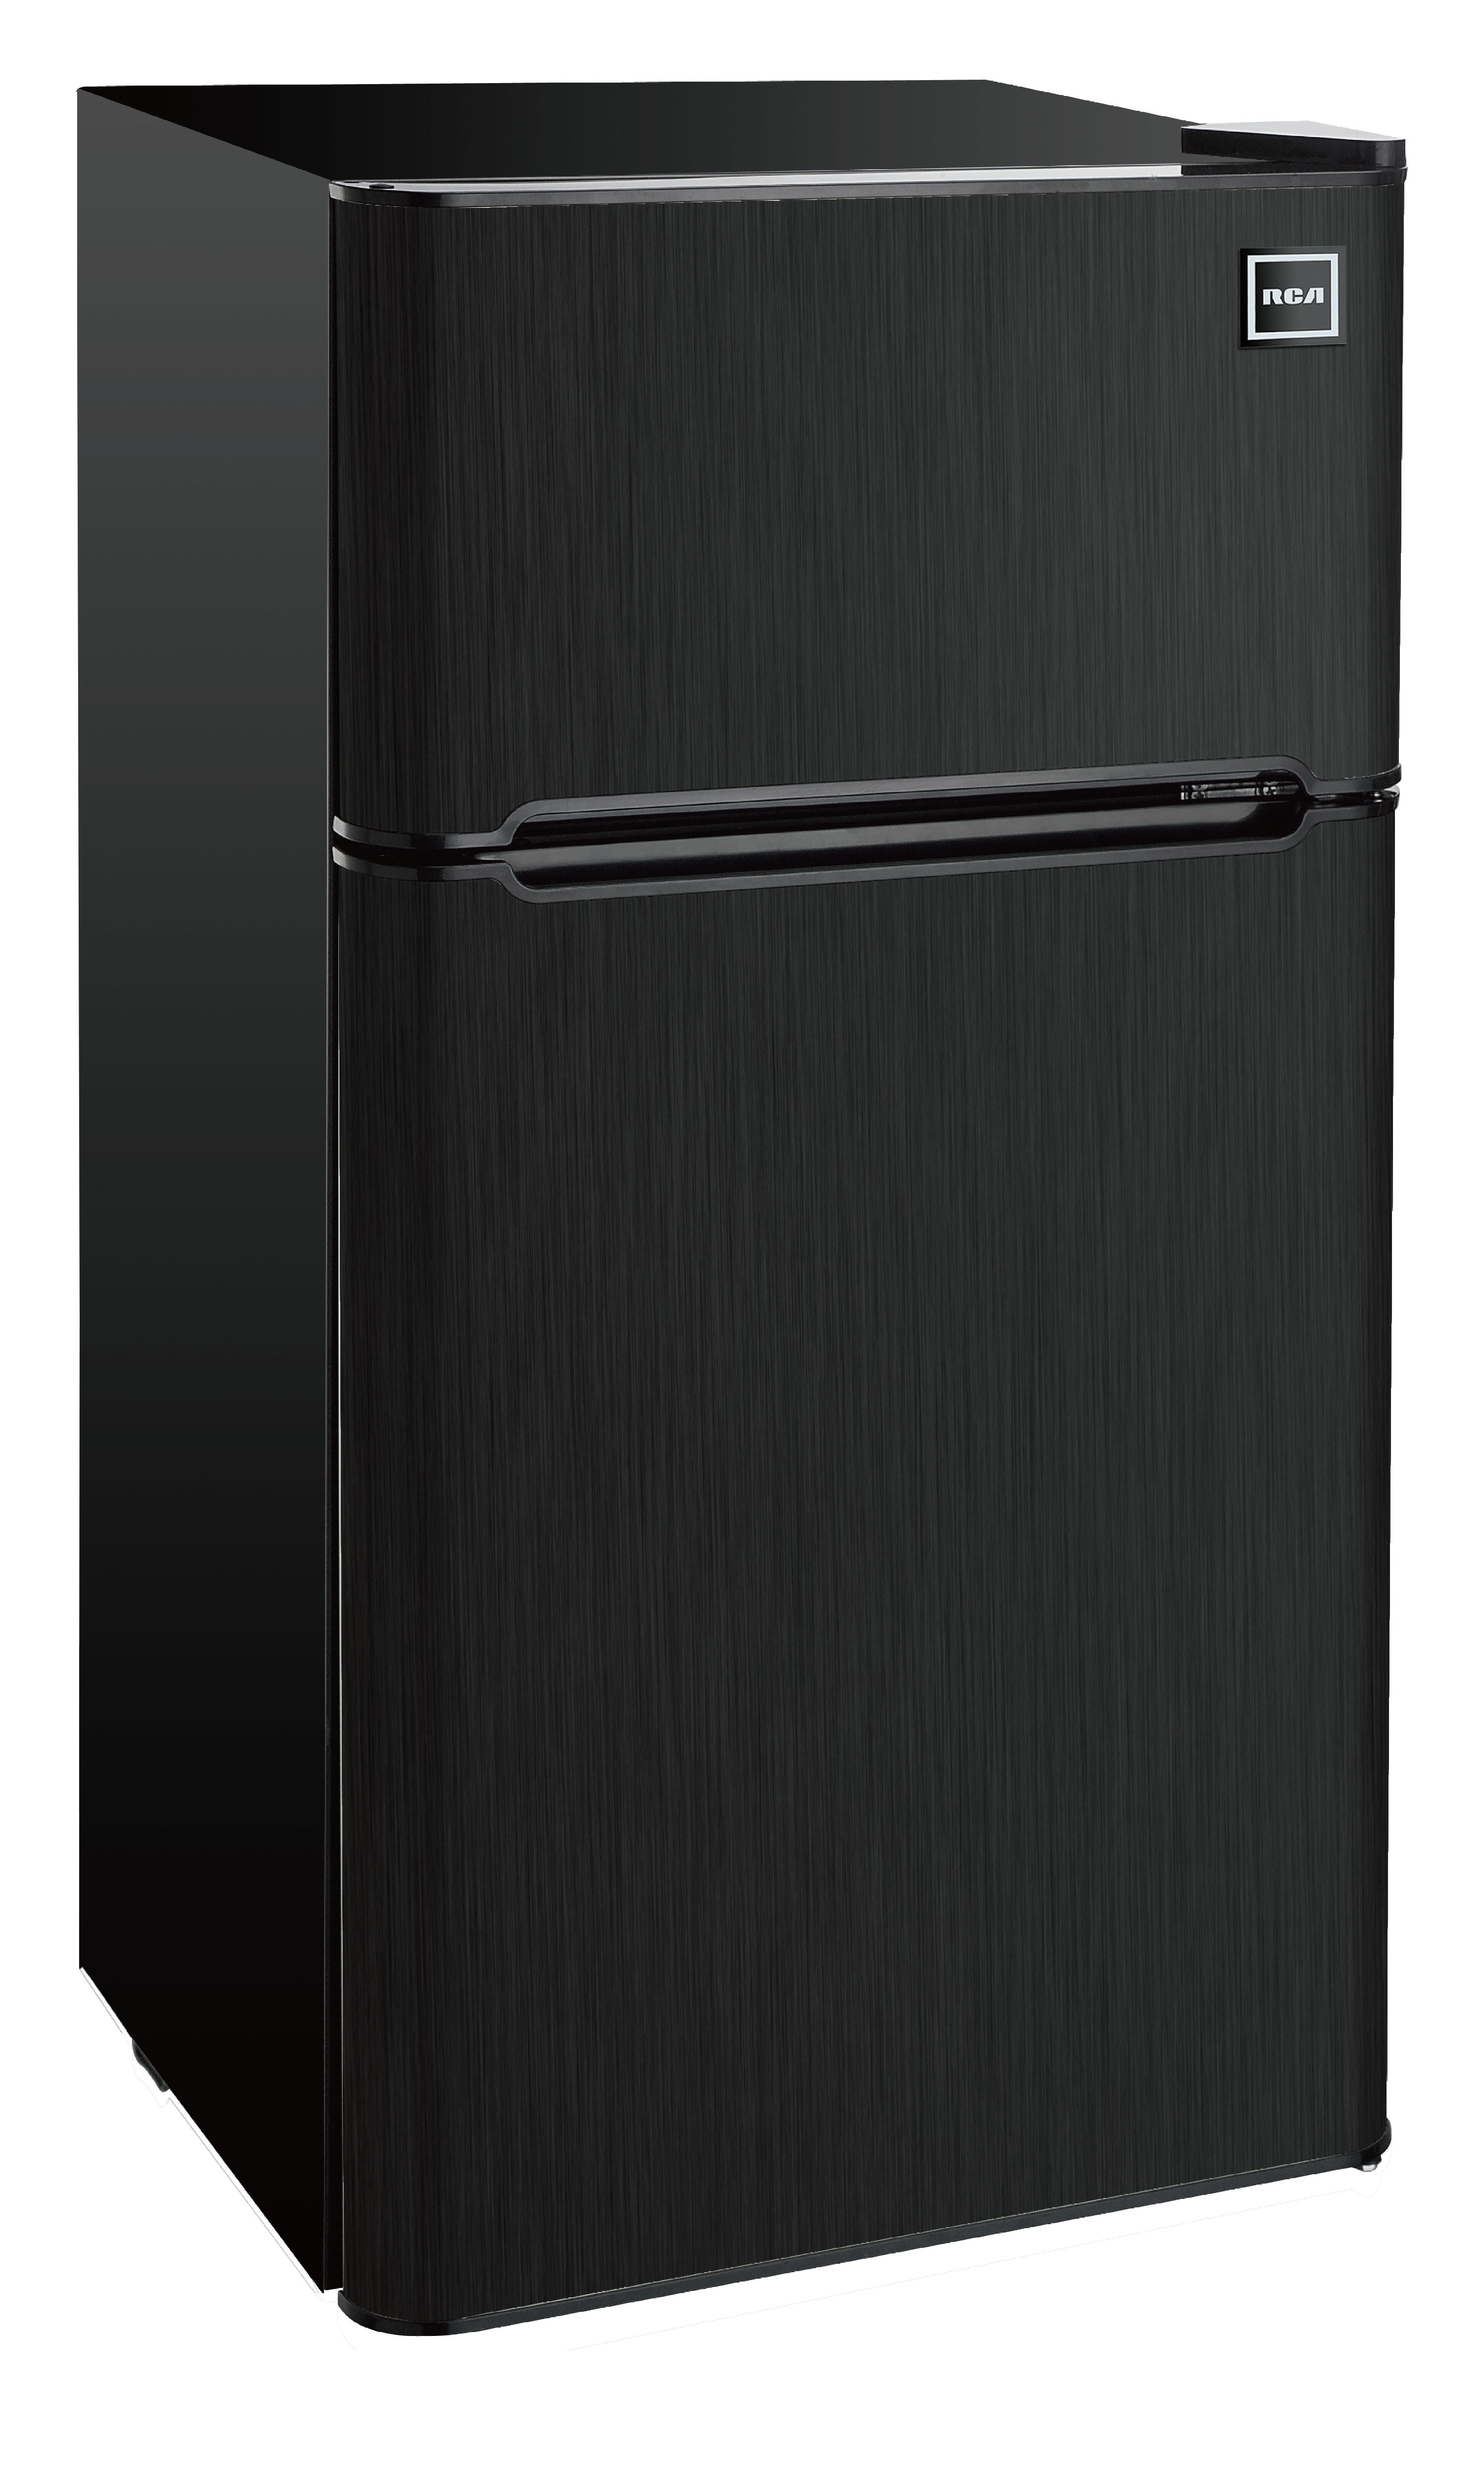 RFR459 Compact Fridge with Freezer-Dual Adjustable Thermostat